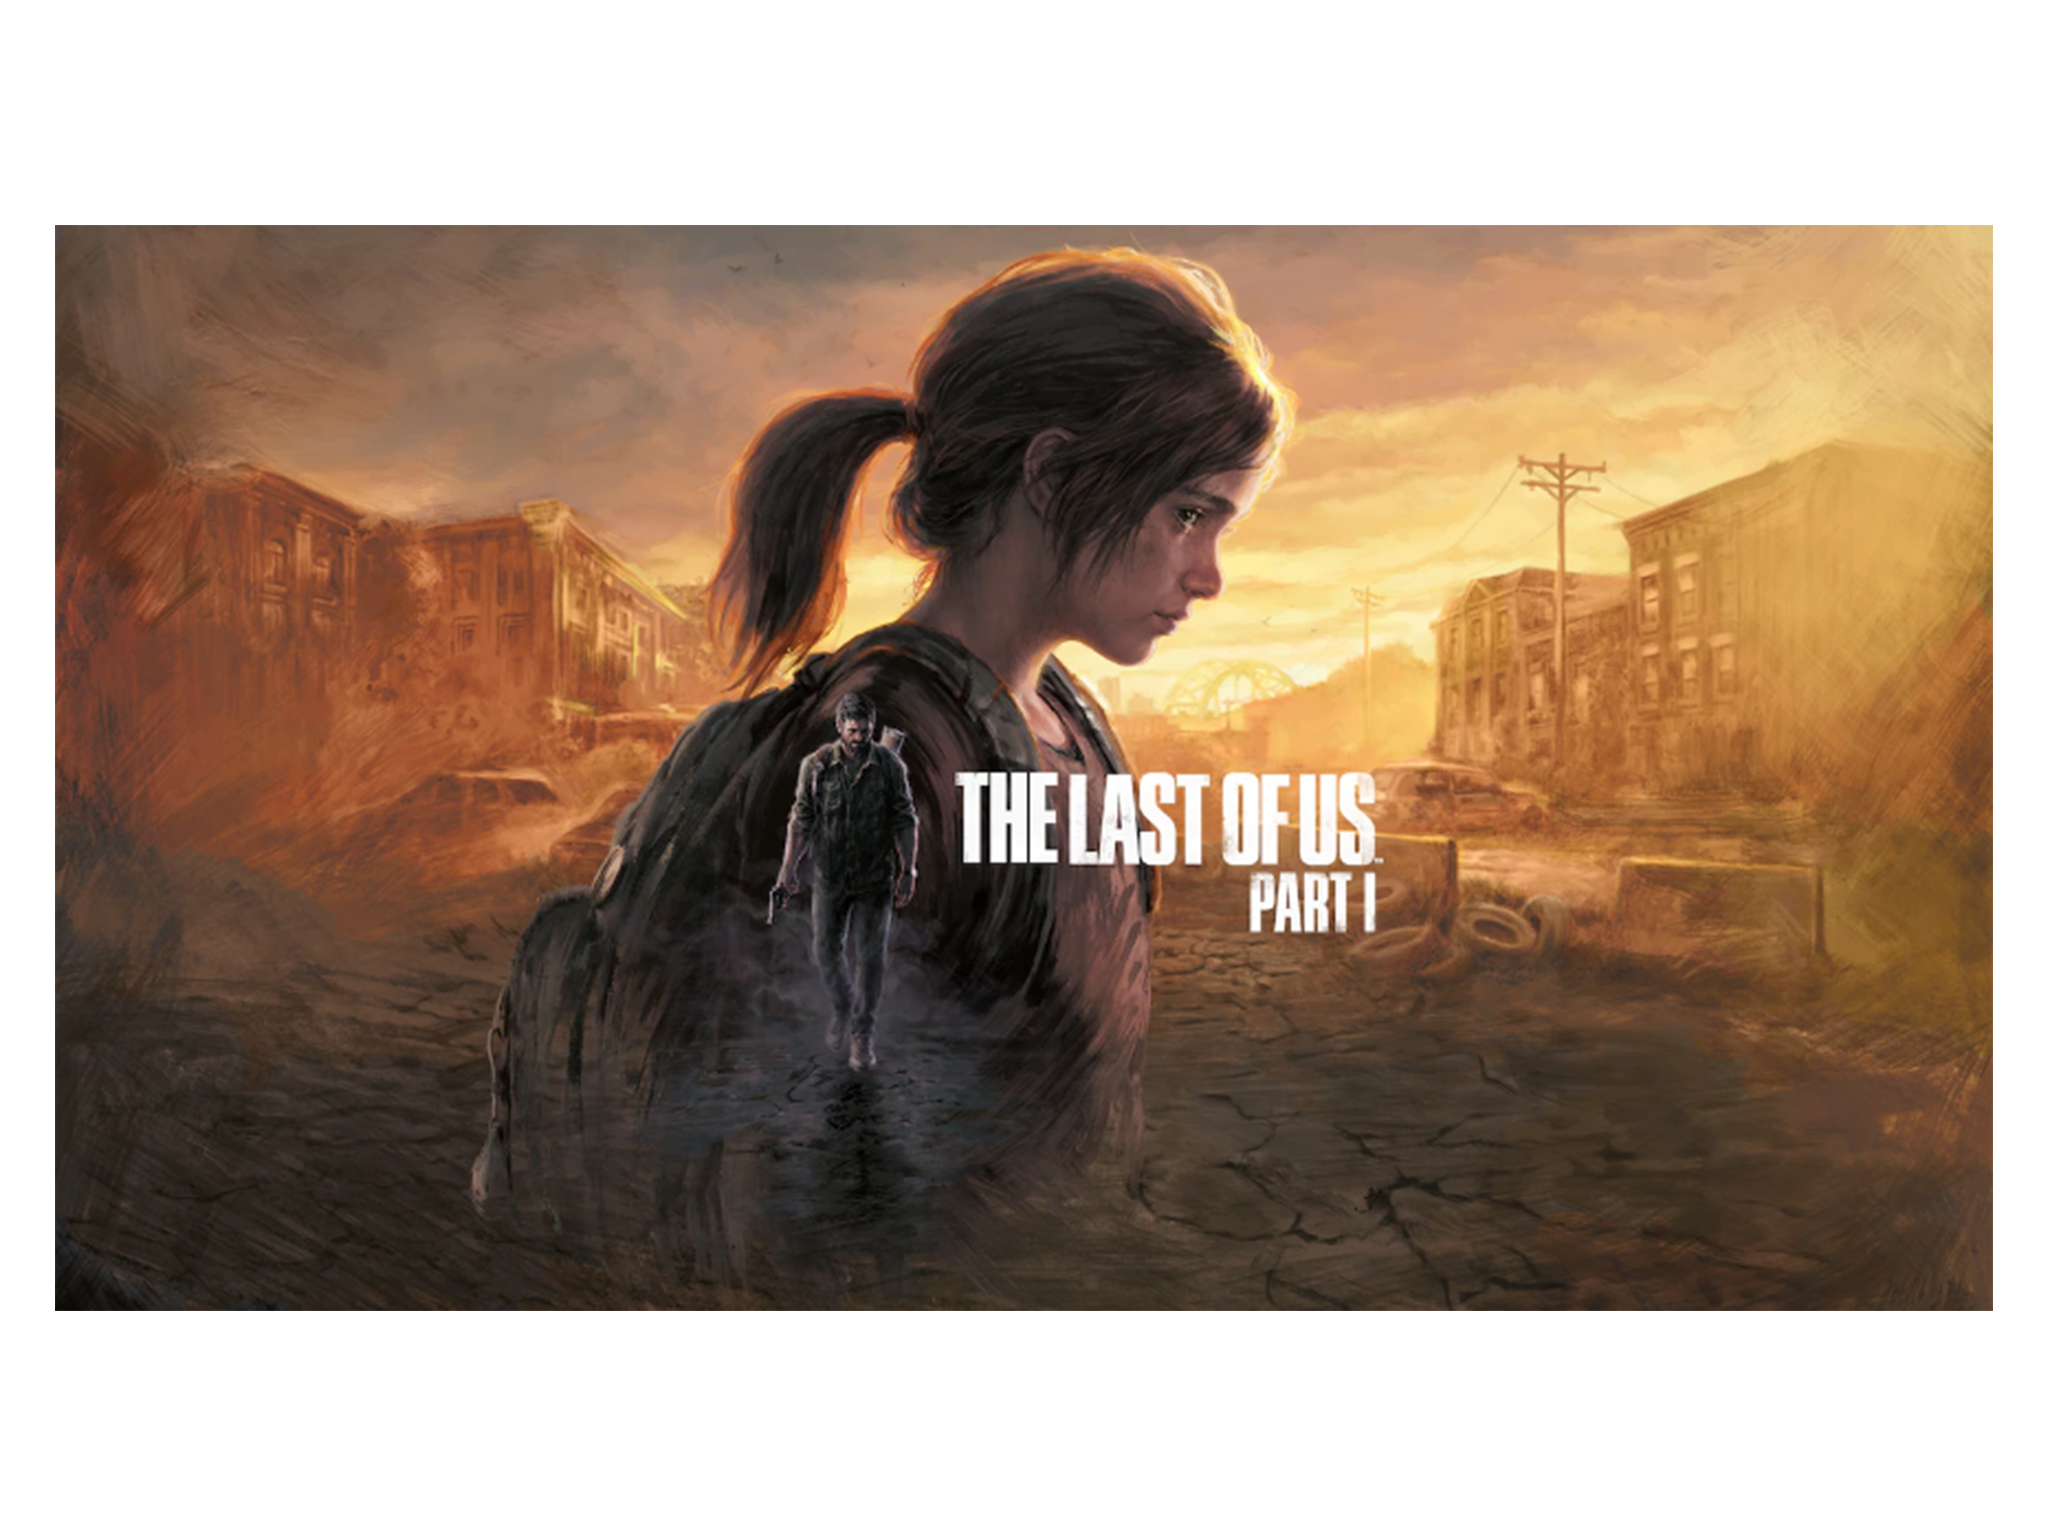 The Last Of Us : Part 1 (PS5)